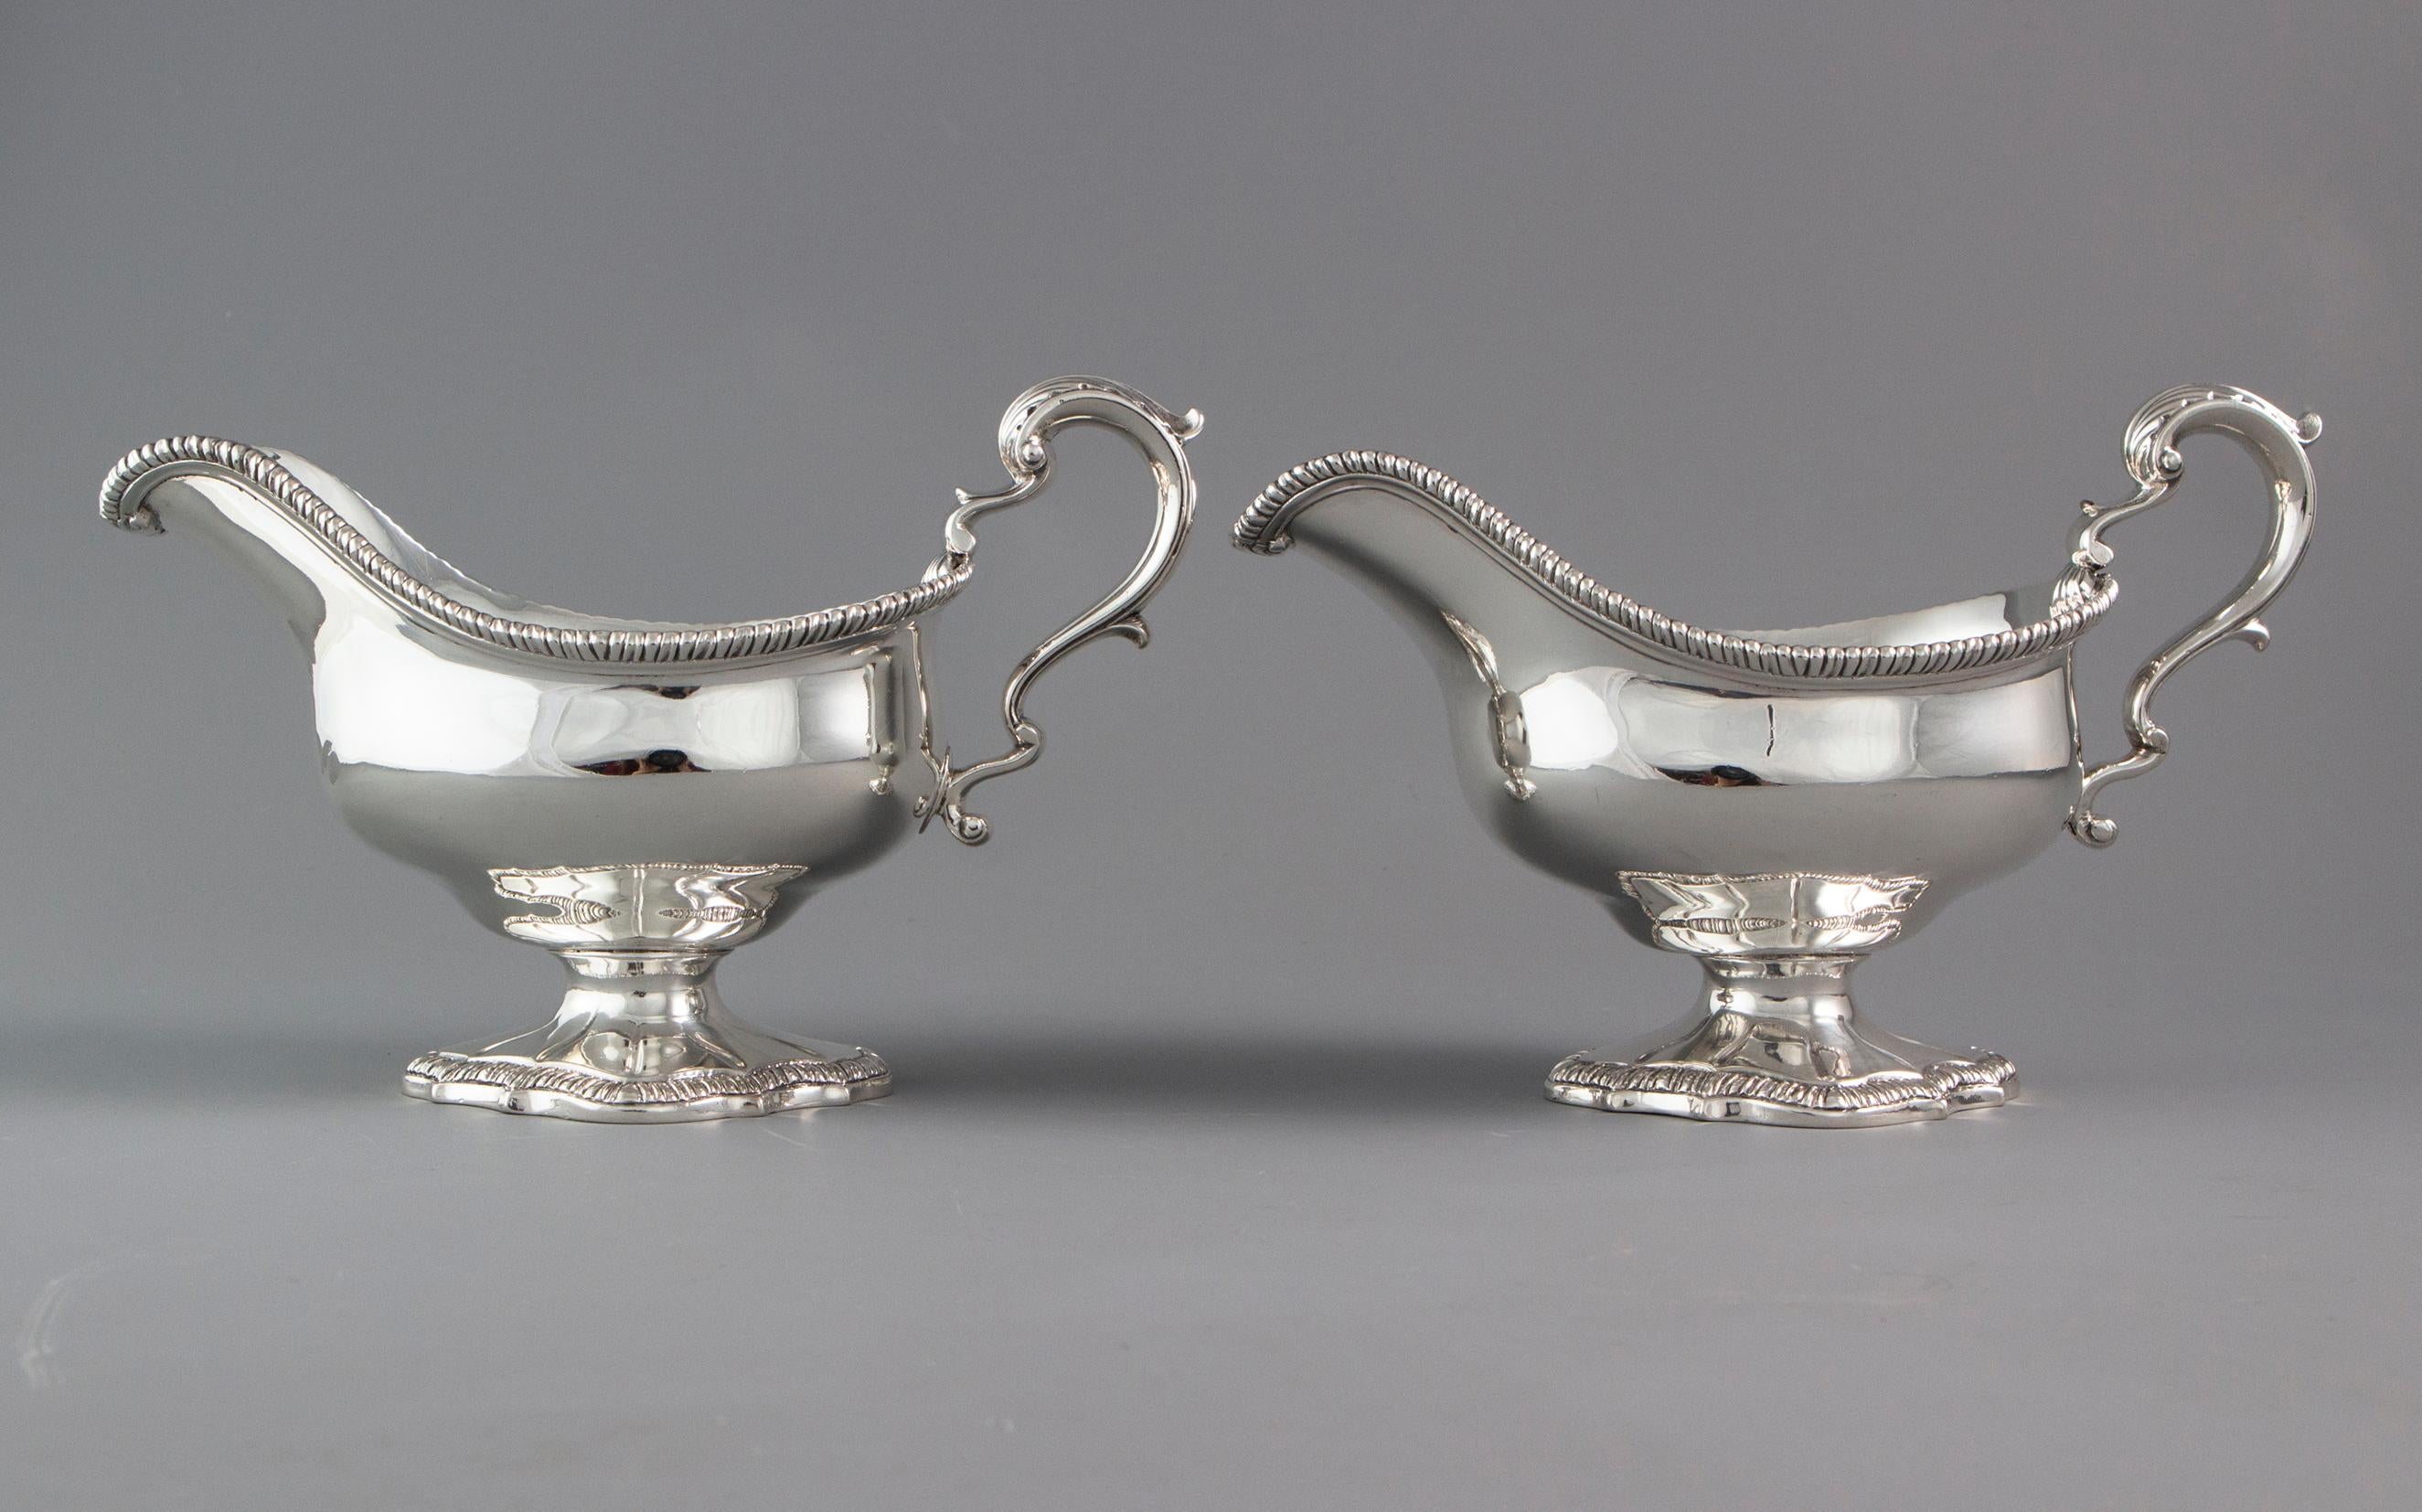 British Pair of George III Silver Sauce Boats, London, 1761